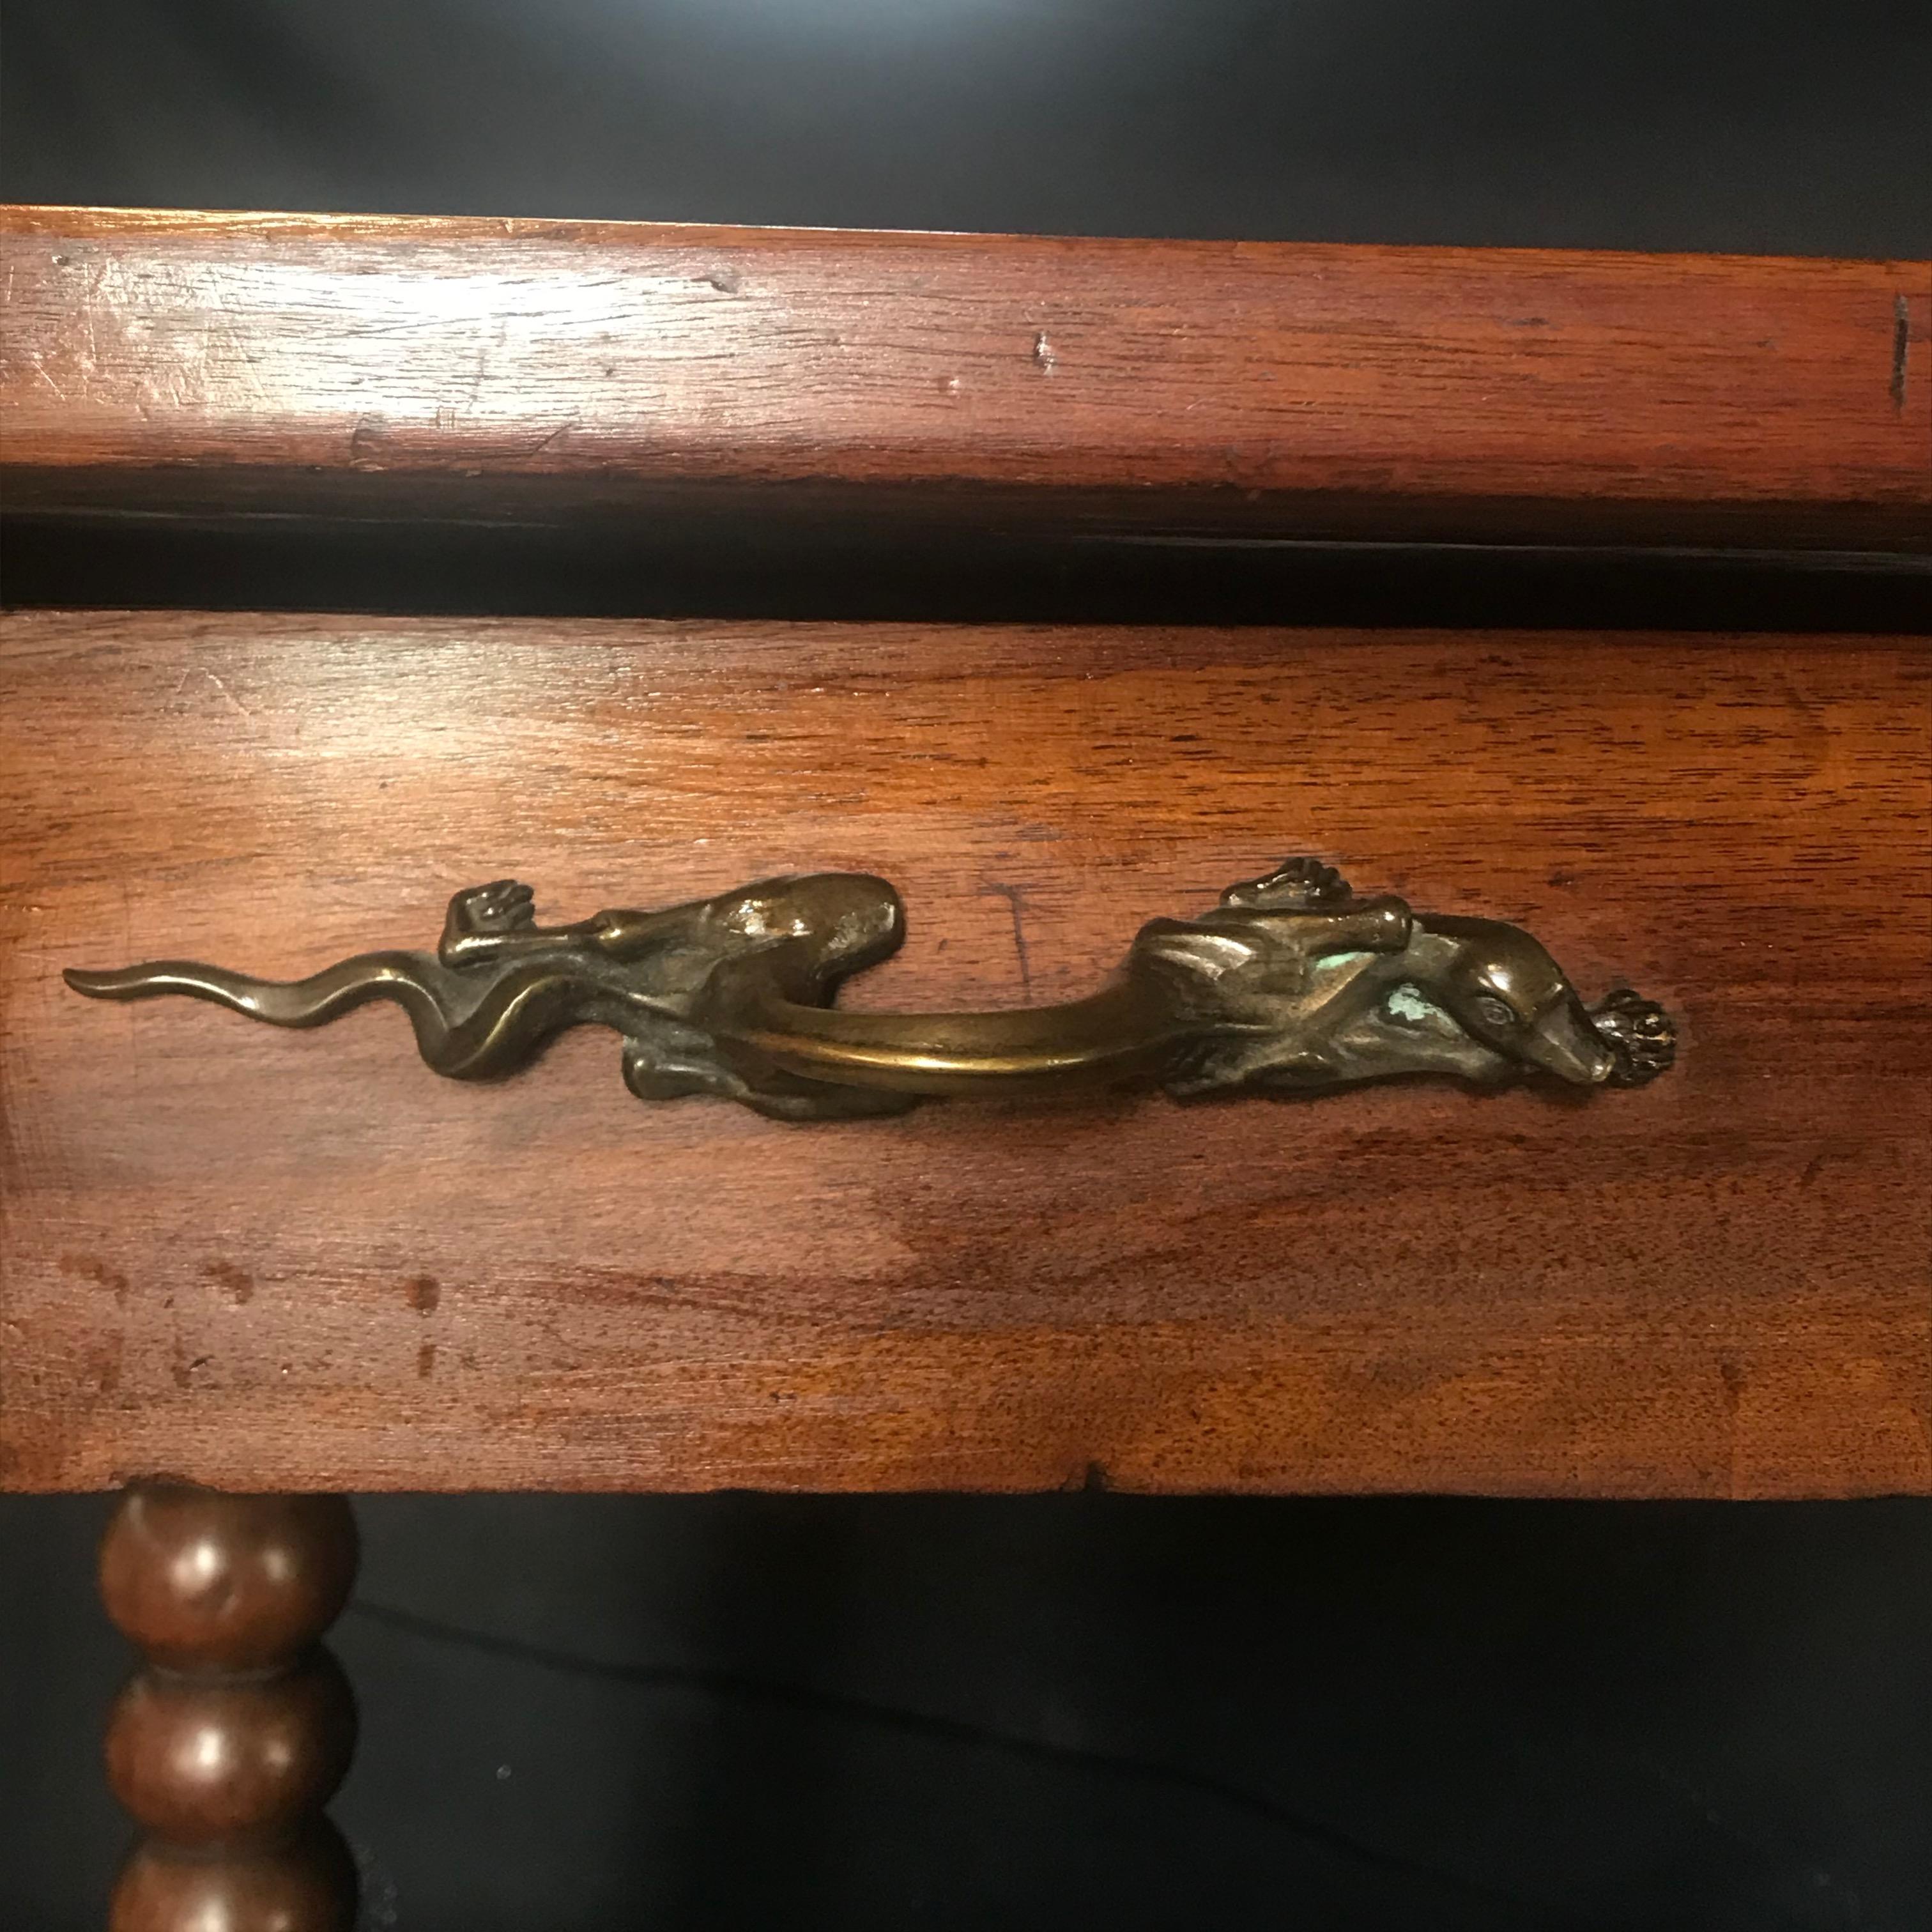 Bought in Lyon, France, this unusual French 19th Century walnut side table has the most unique pulls we have ever seen: beautifully crafted bronze lizard pulls! The size of this versatile early French side table or bedside table with early hand